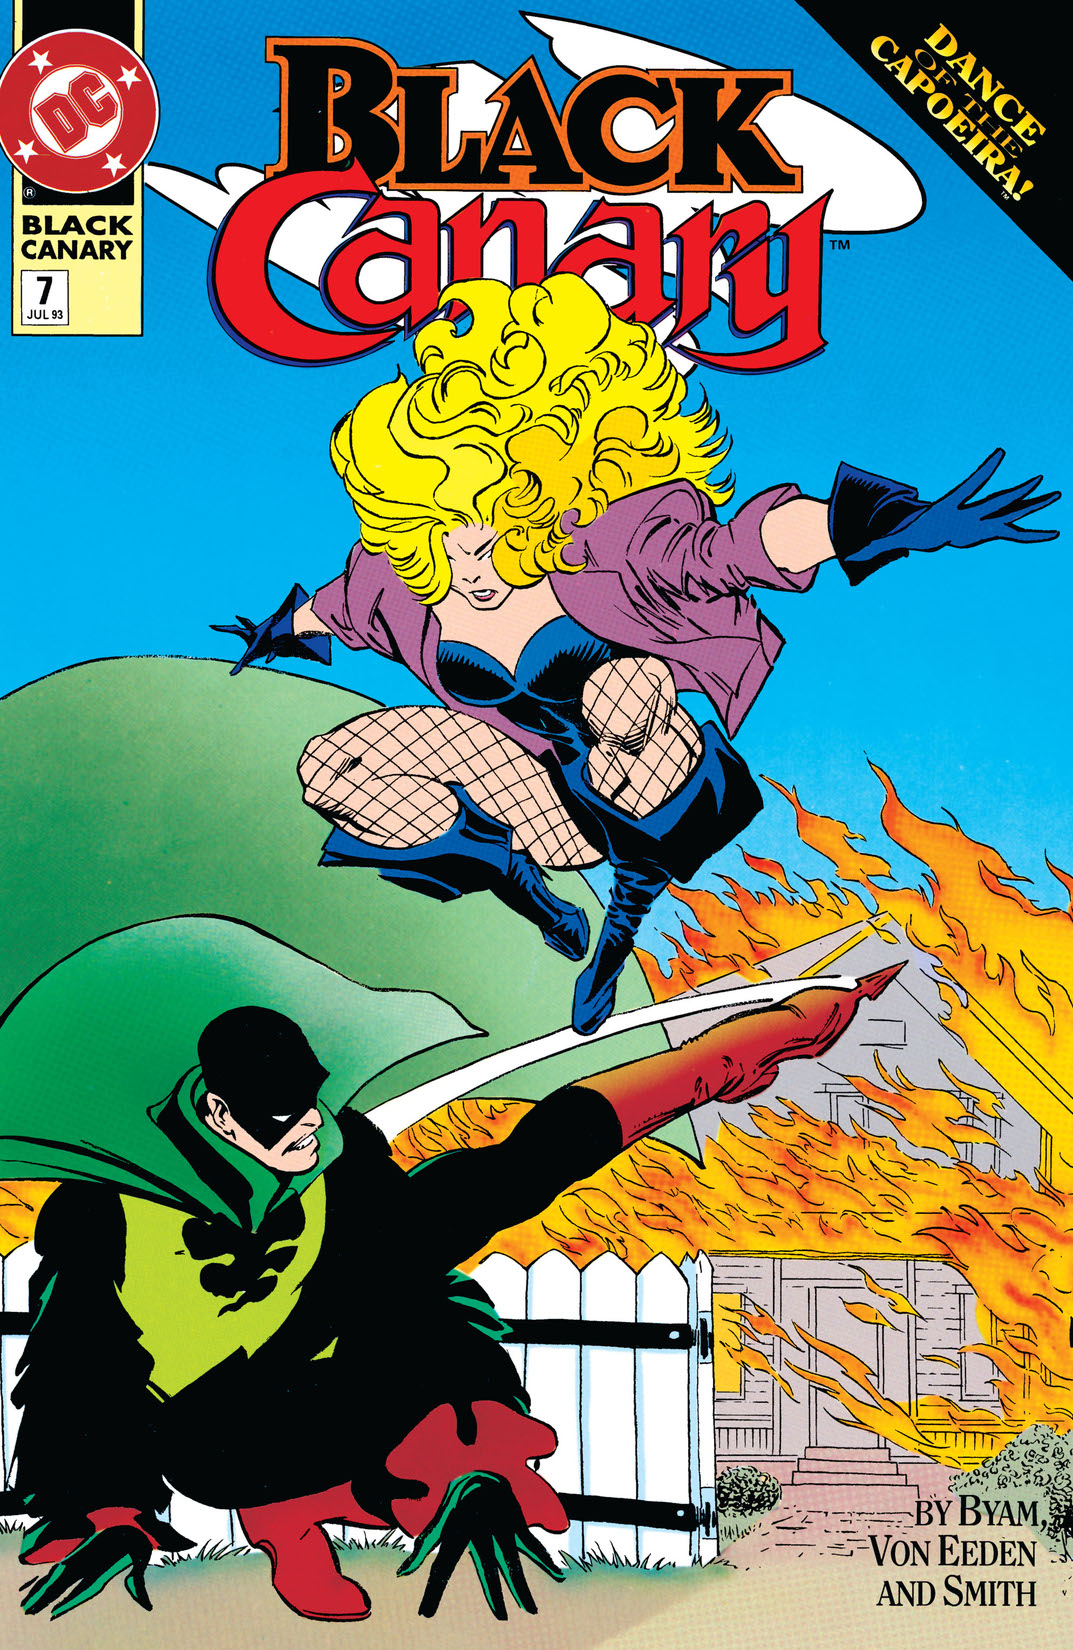 Black Canary (1992-) #7 preview images